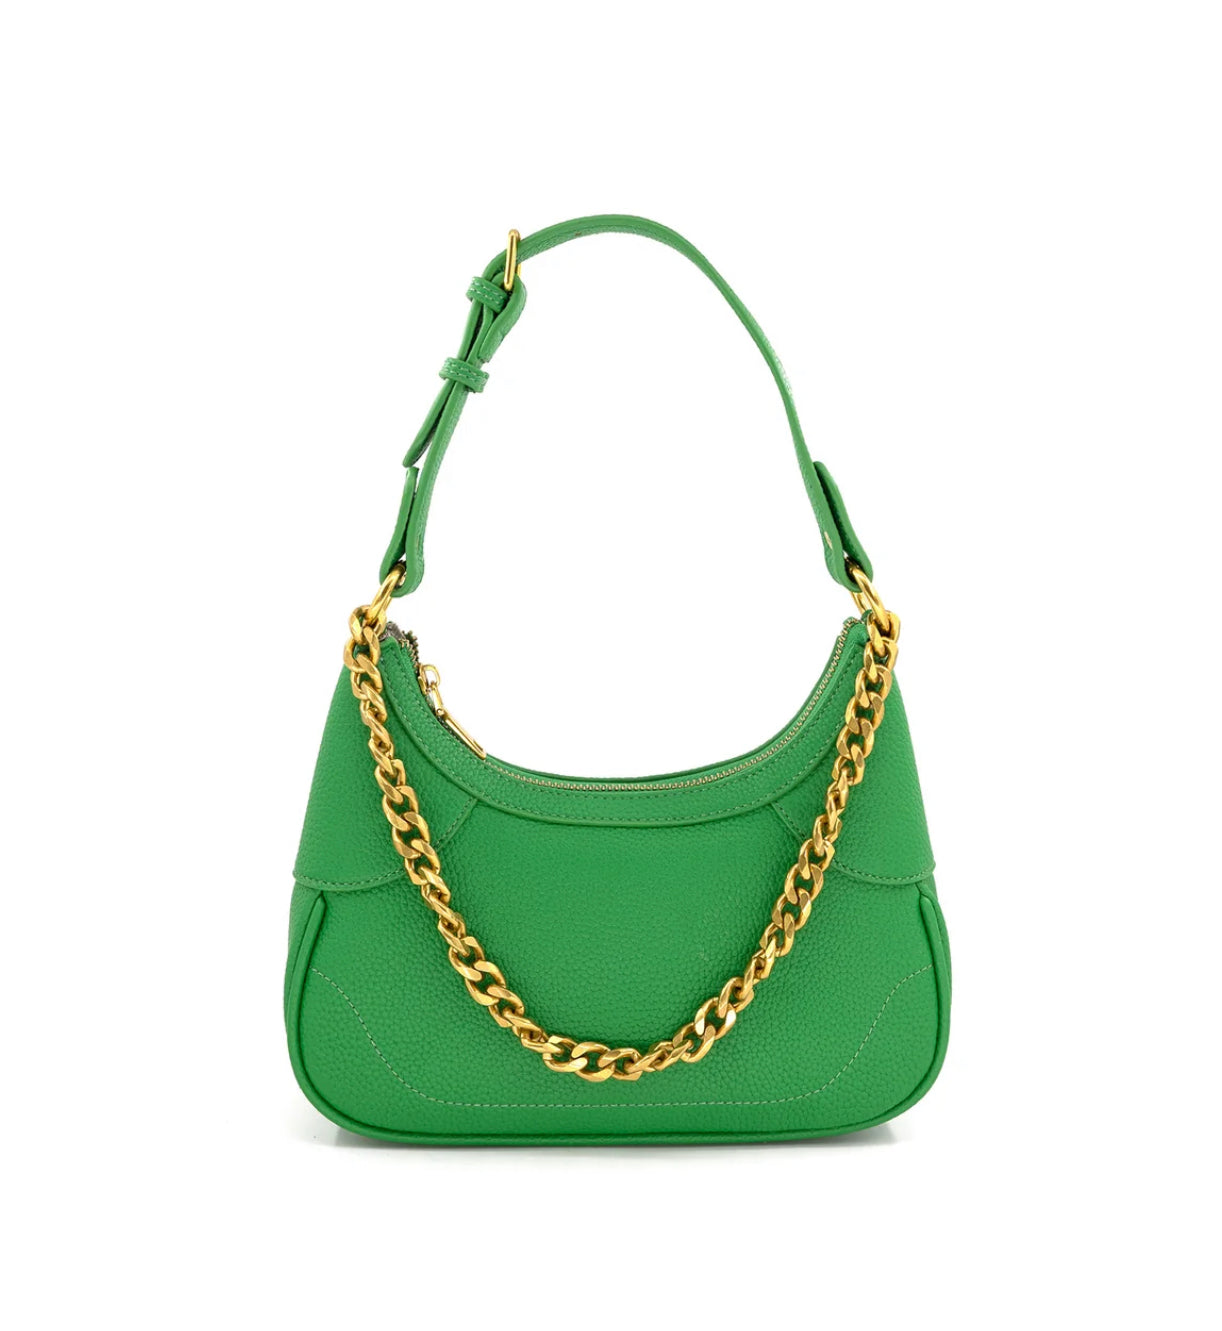 BC Bag Chain Bag - Available in 5 colors